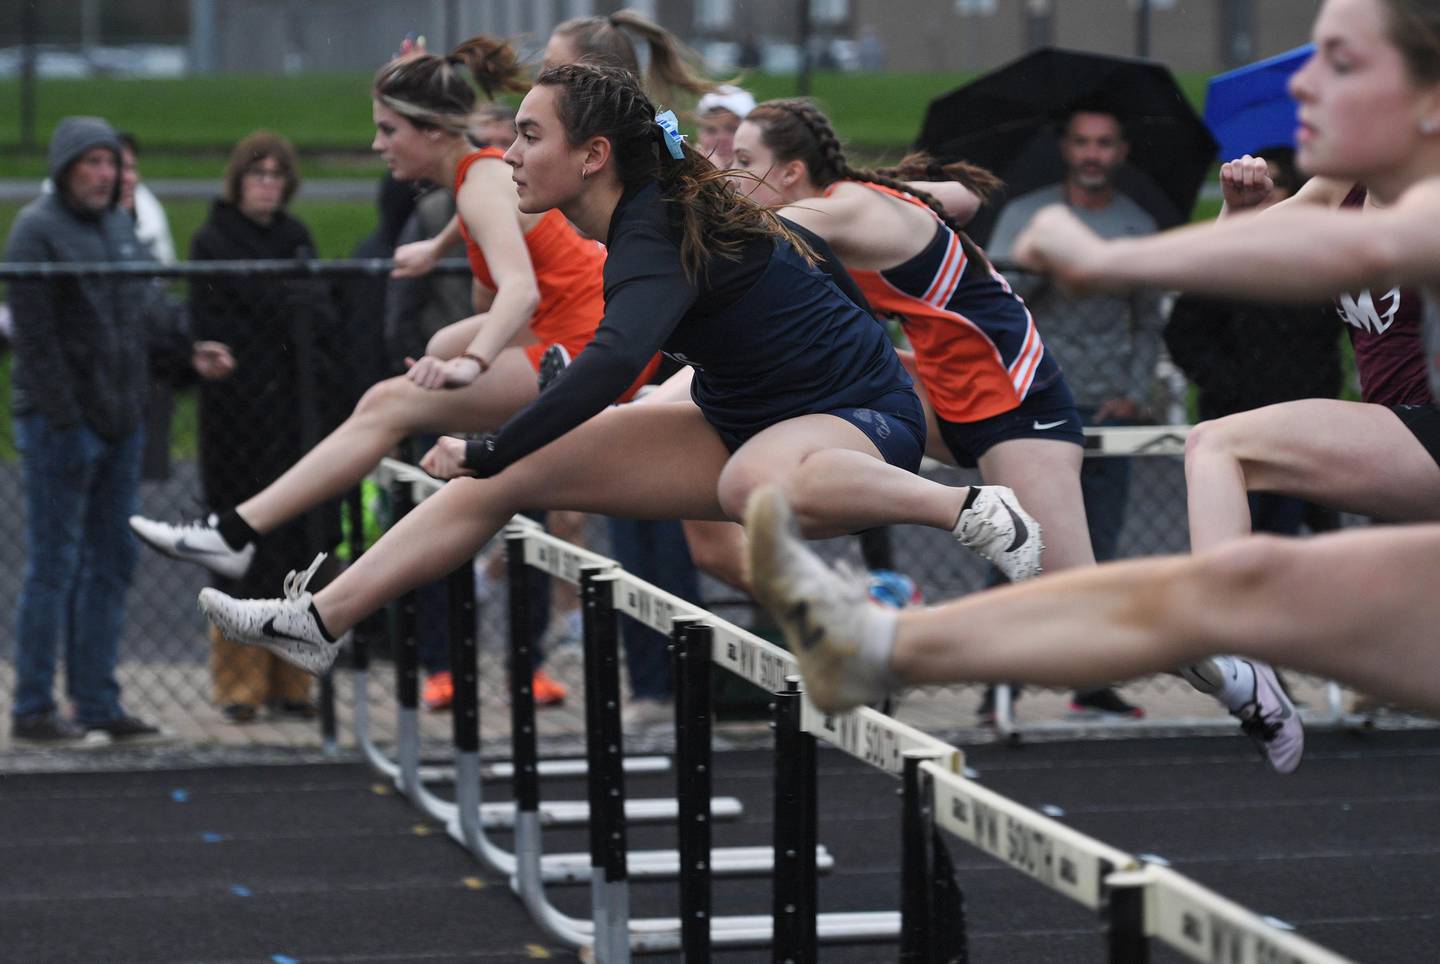 Downers Grove South’s Elise D’Aquila leads heat four of the 100-meter hurdles at the Wheaton Warrenville South girls track invitational in Wheaton on Friday, April 29, 2022.